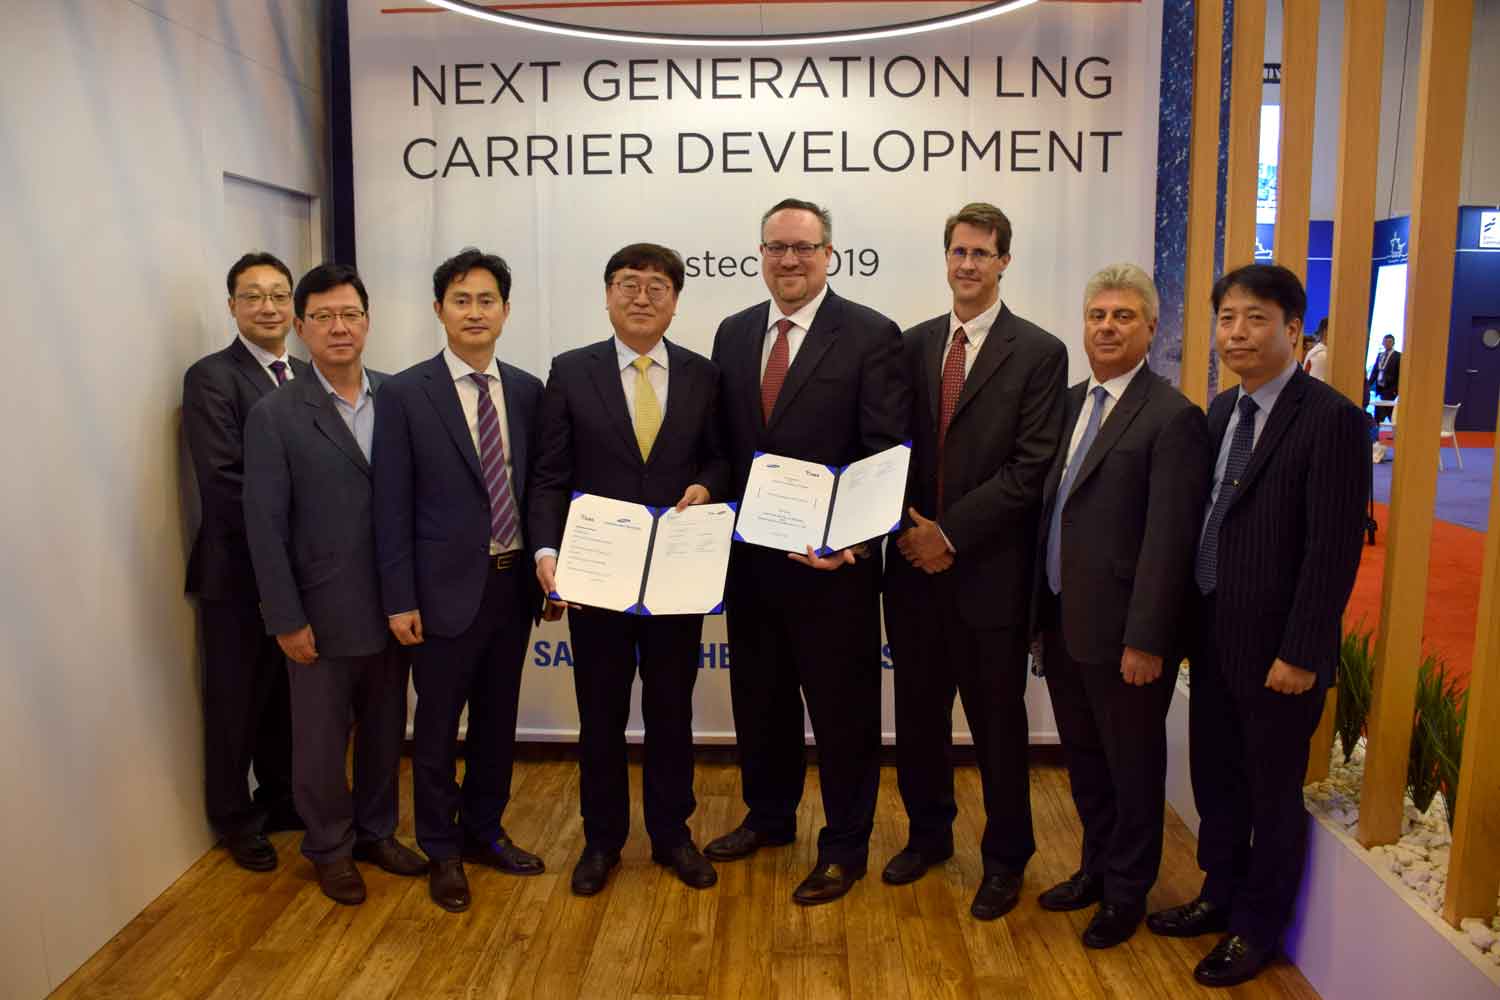 Cooperation deal on LNG carrier development